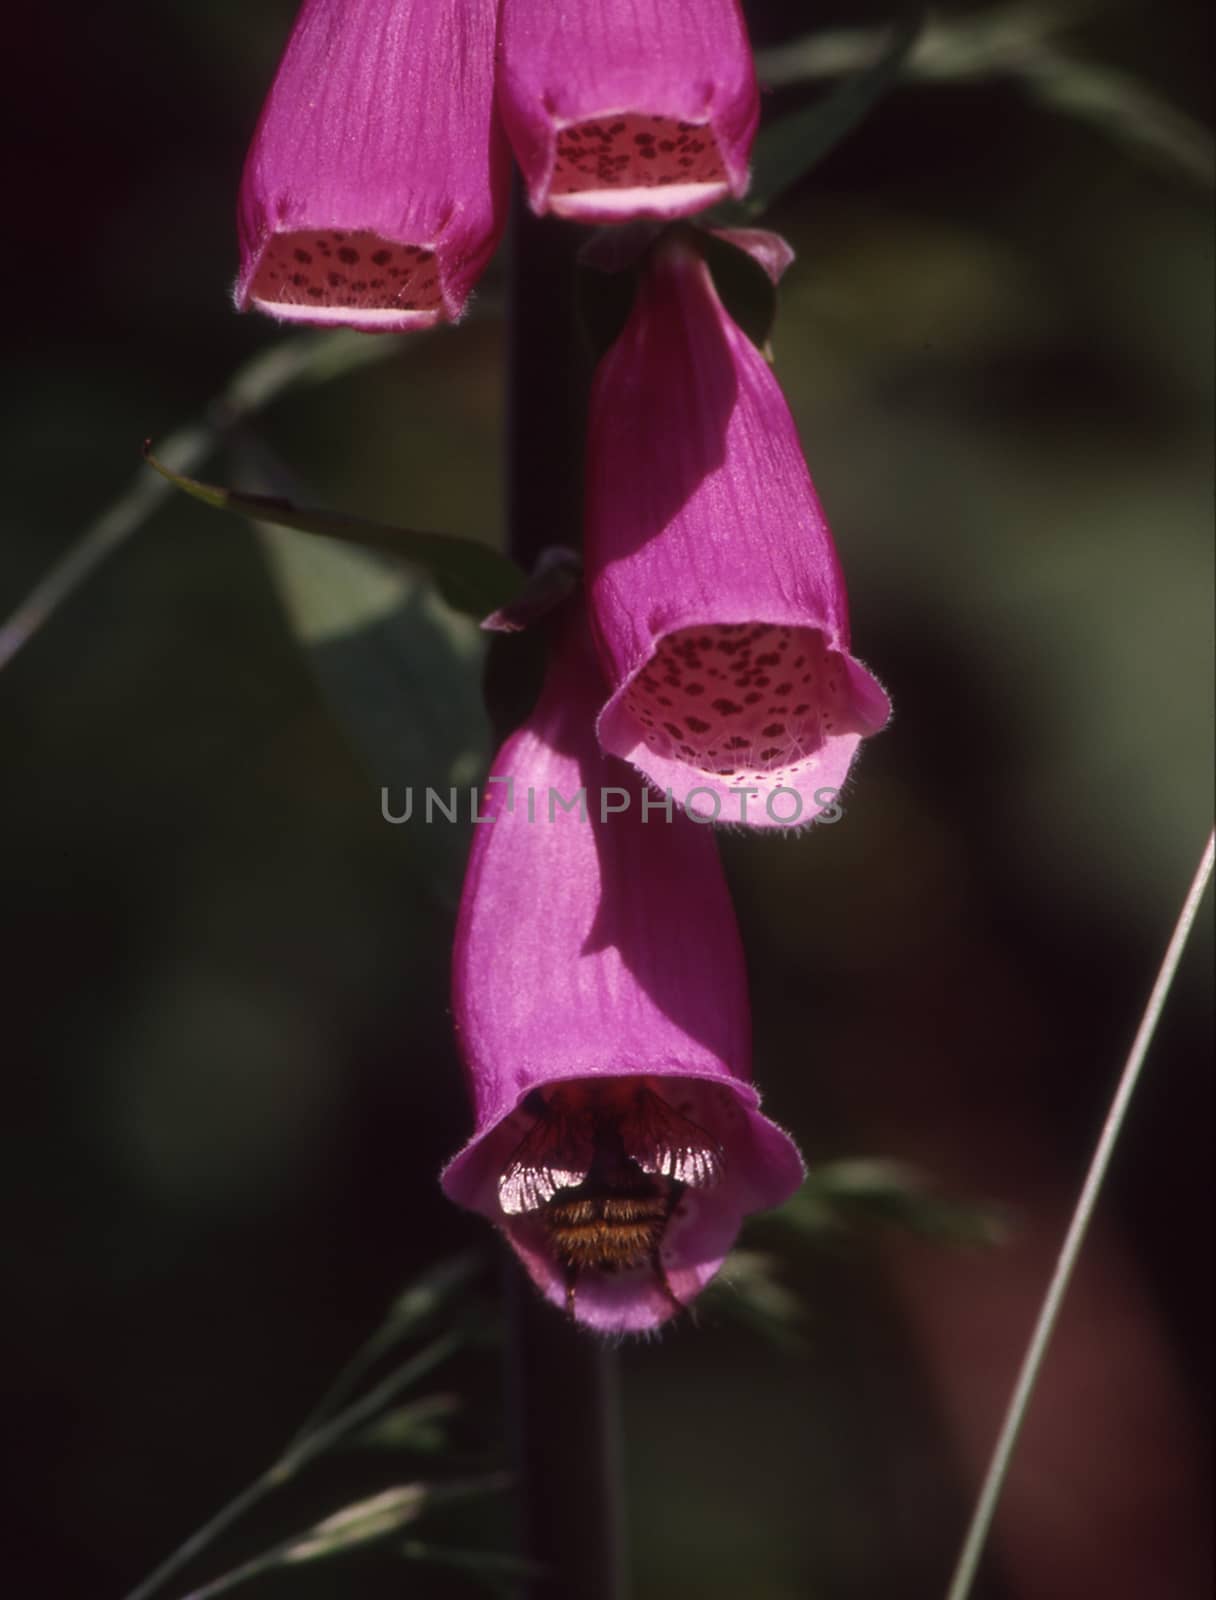 red foxglove flowers are visited by Hummel by Dr-Lange